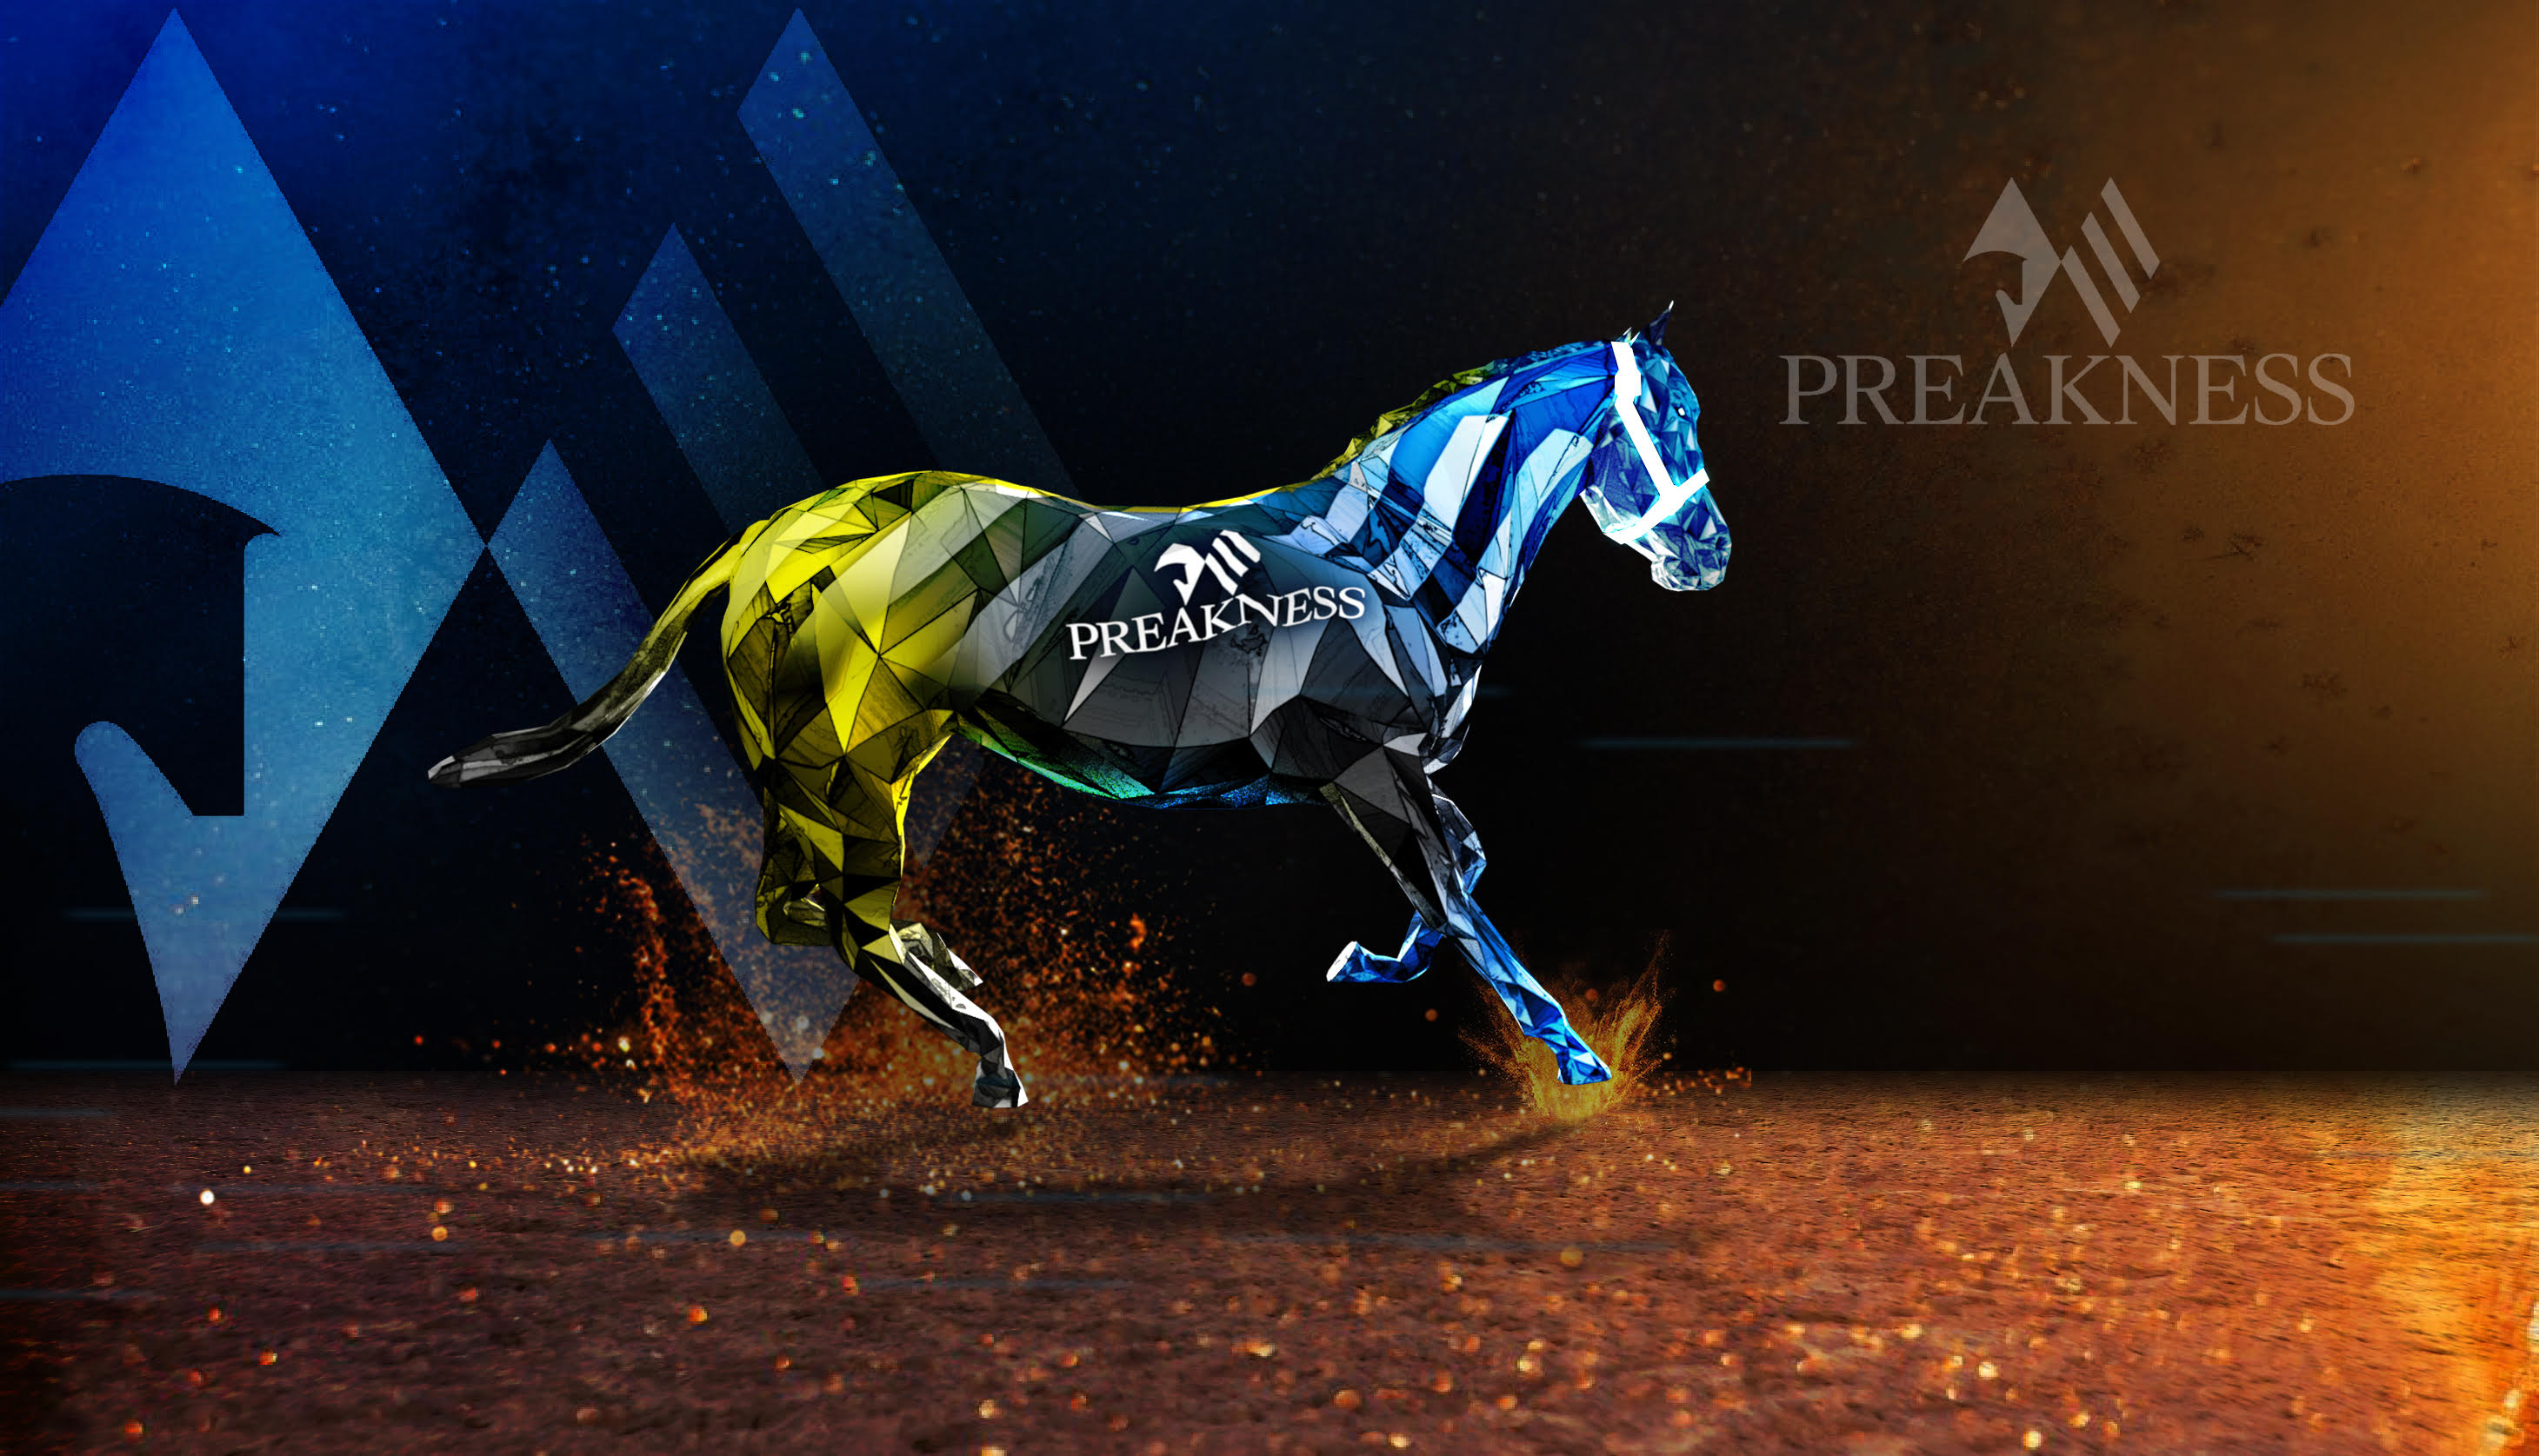 The Preakness x Zed Run Genesis Z10 Special Edition Horse